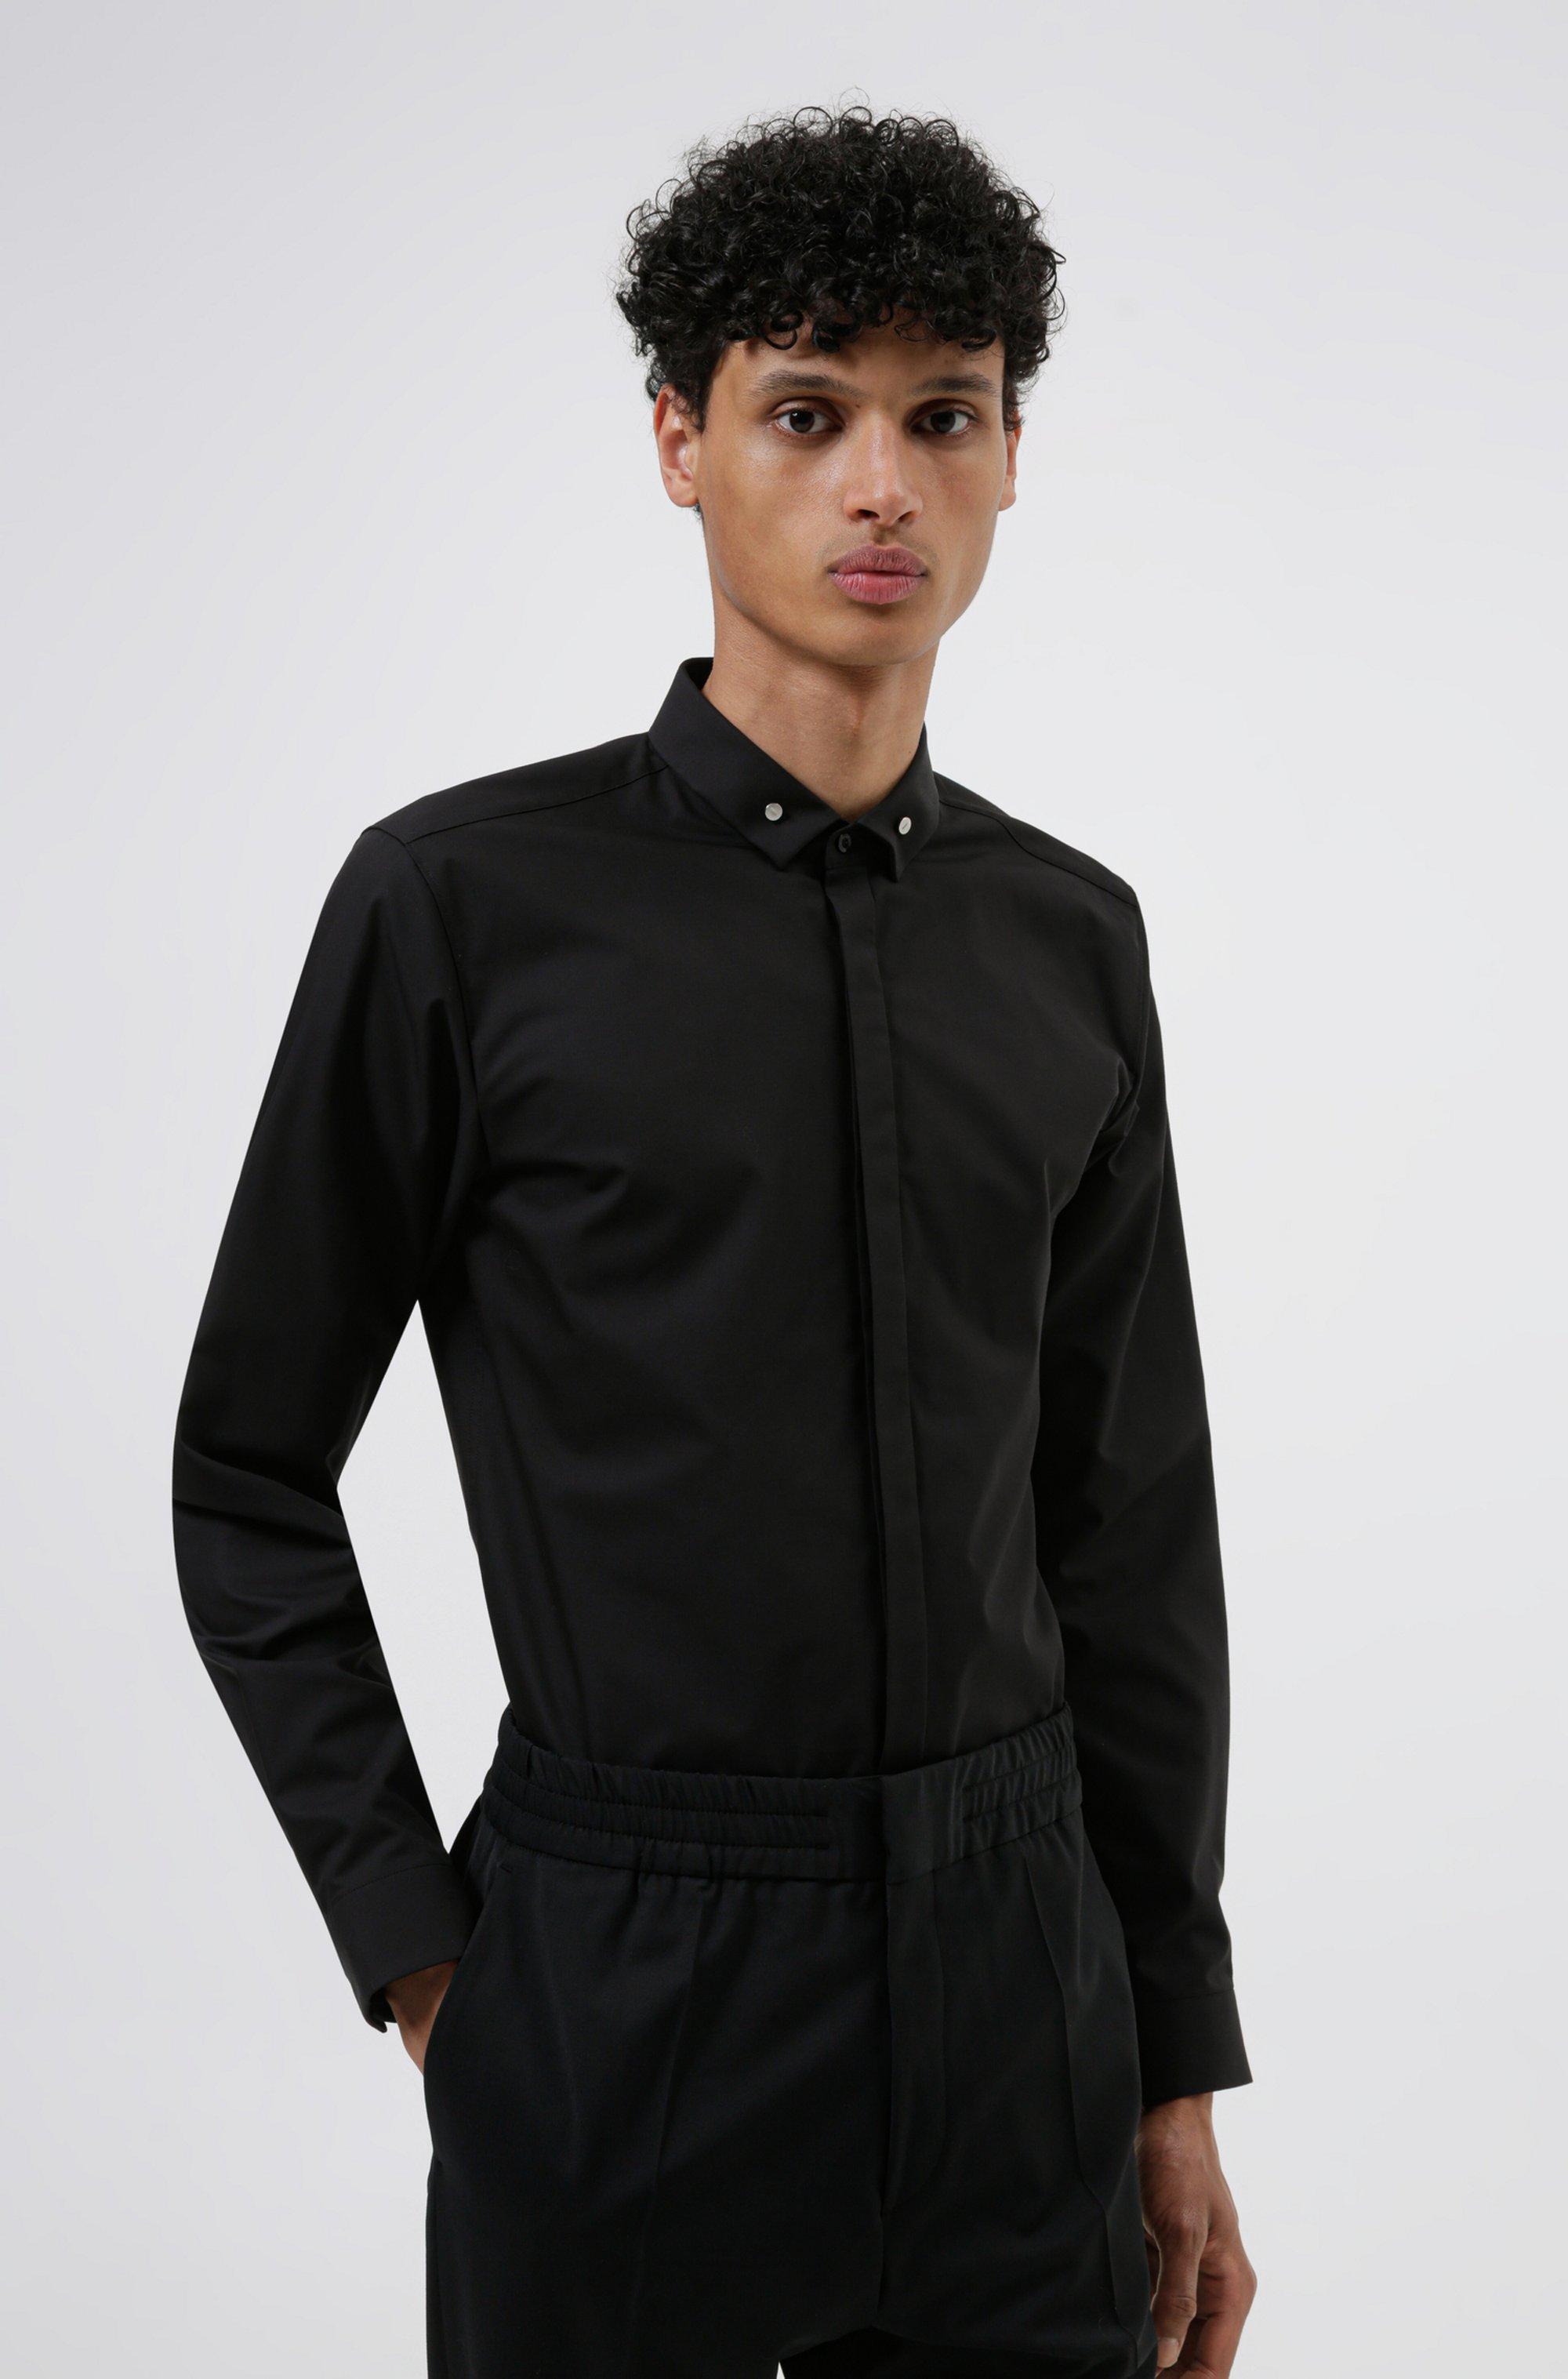 BOSS by HUGO BOSS Cotton Easy Iron Extra Slim Fit Shirt With Collar Studs  in Black for Men - Lyst